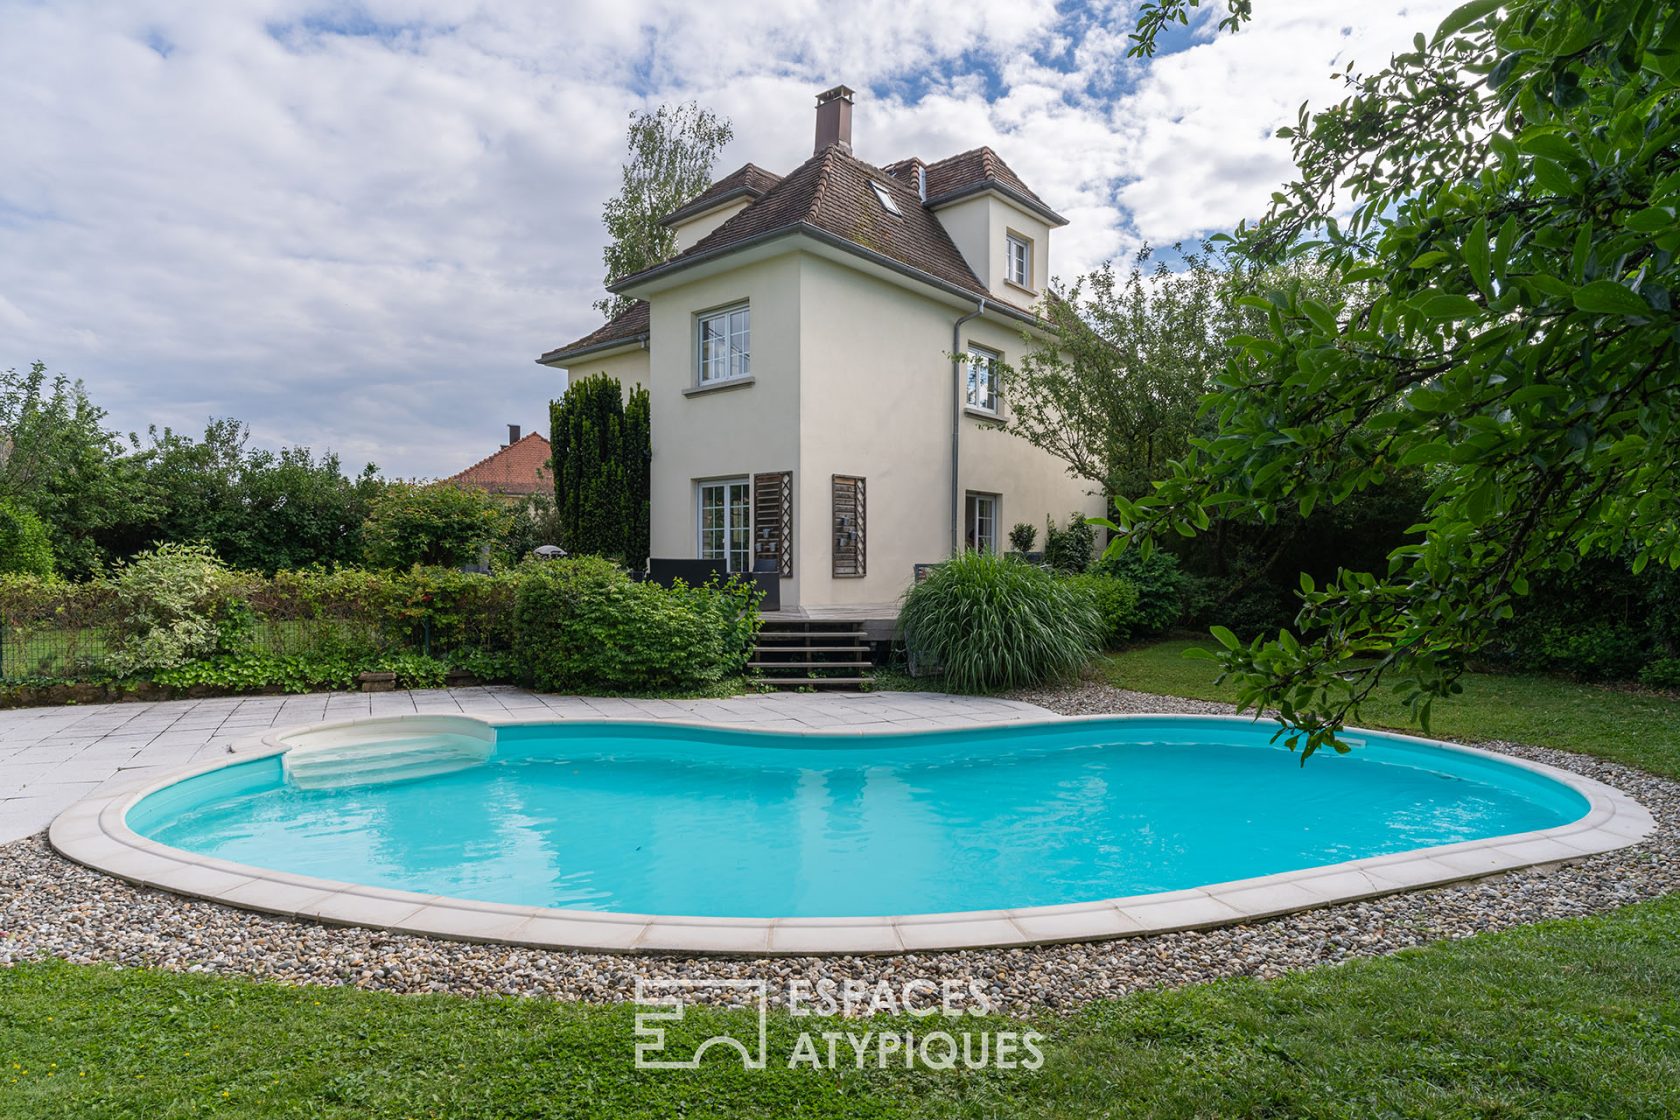 Renovated manor house with swimming pool and leafy garden